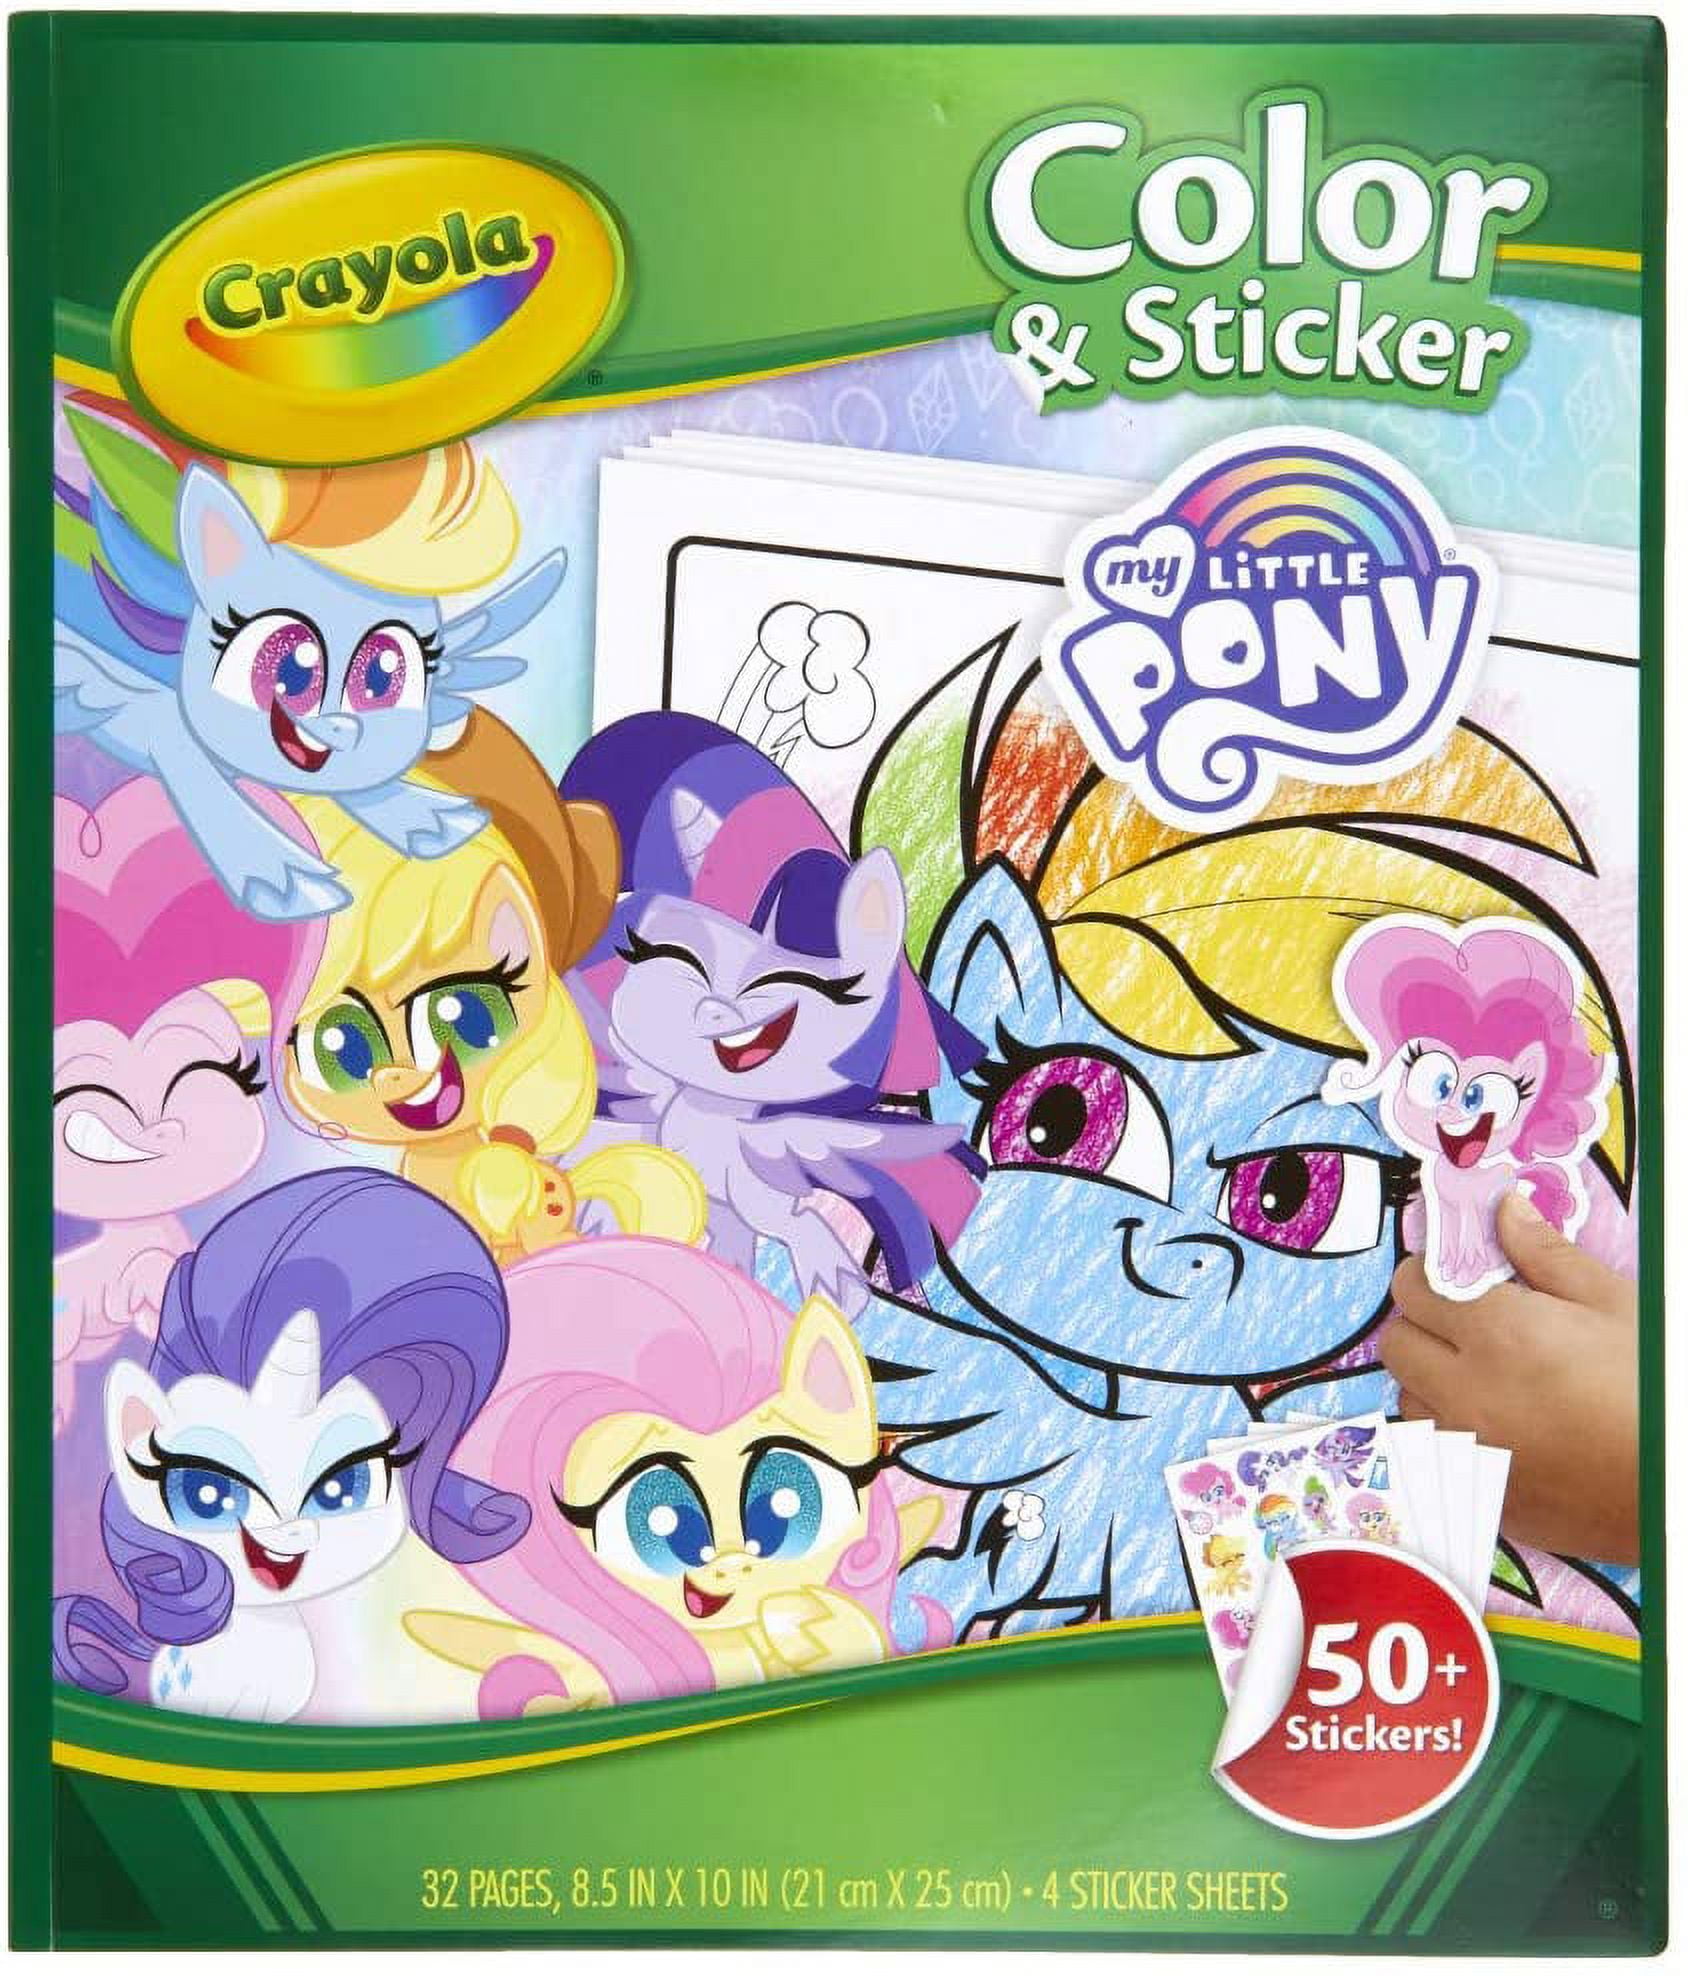 My Little Ponies Coloring Pages Printable - Get Coloring Pages